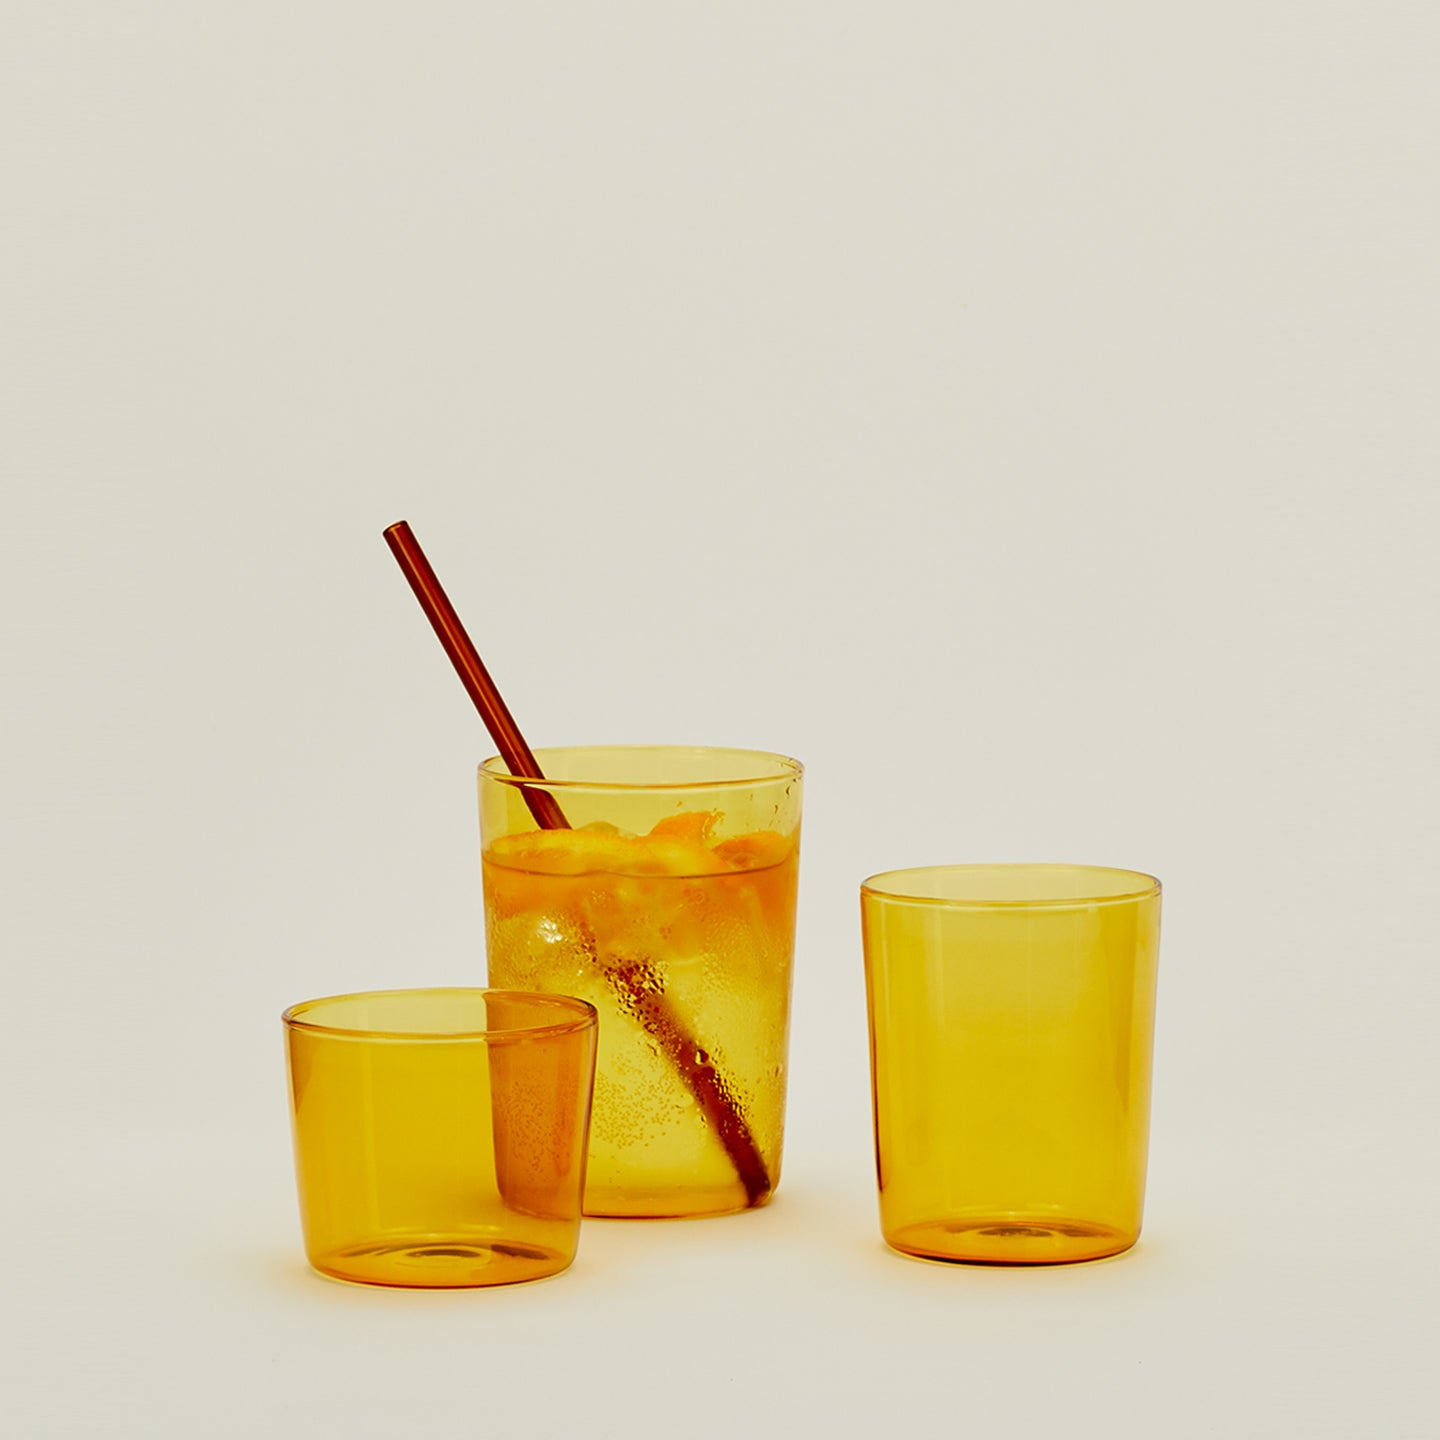 Group of three Essential Glasses in Amber in various sizes, filled with water and fruit with a coordinating glass straw.